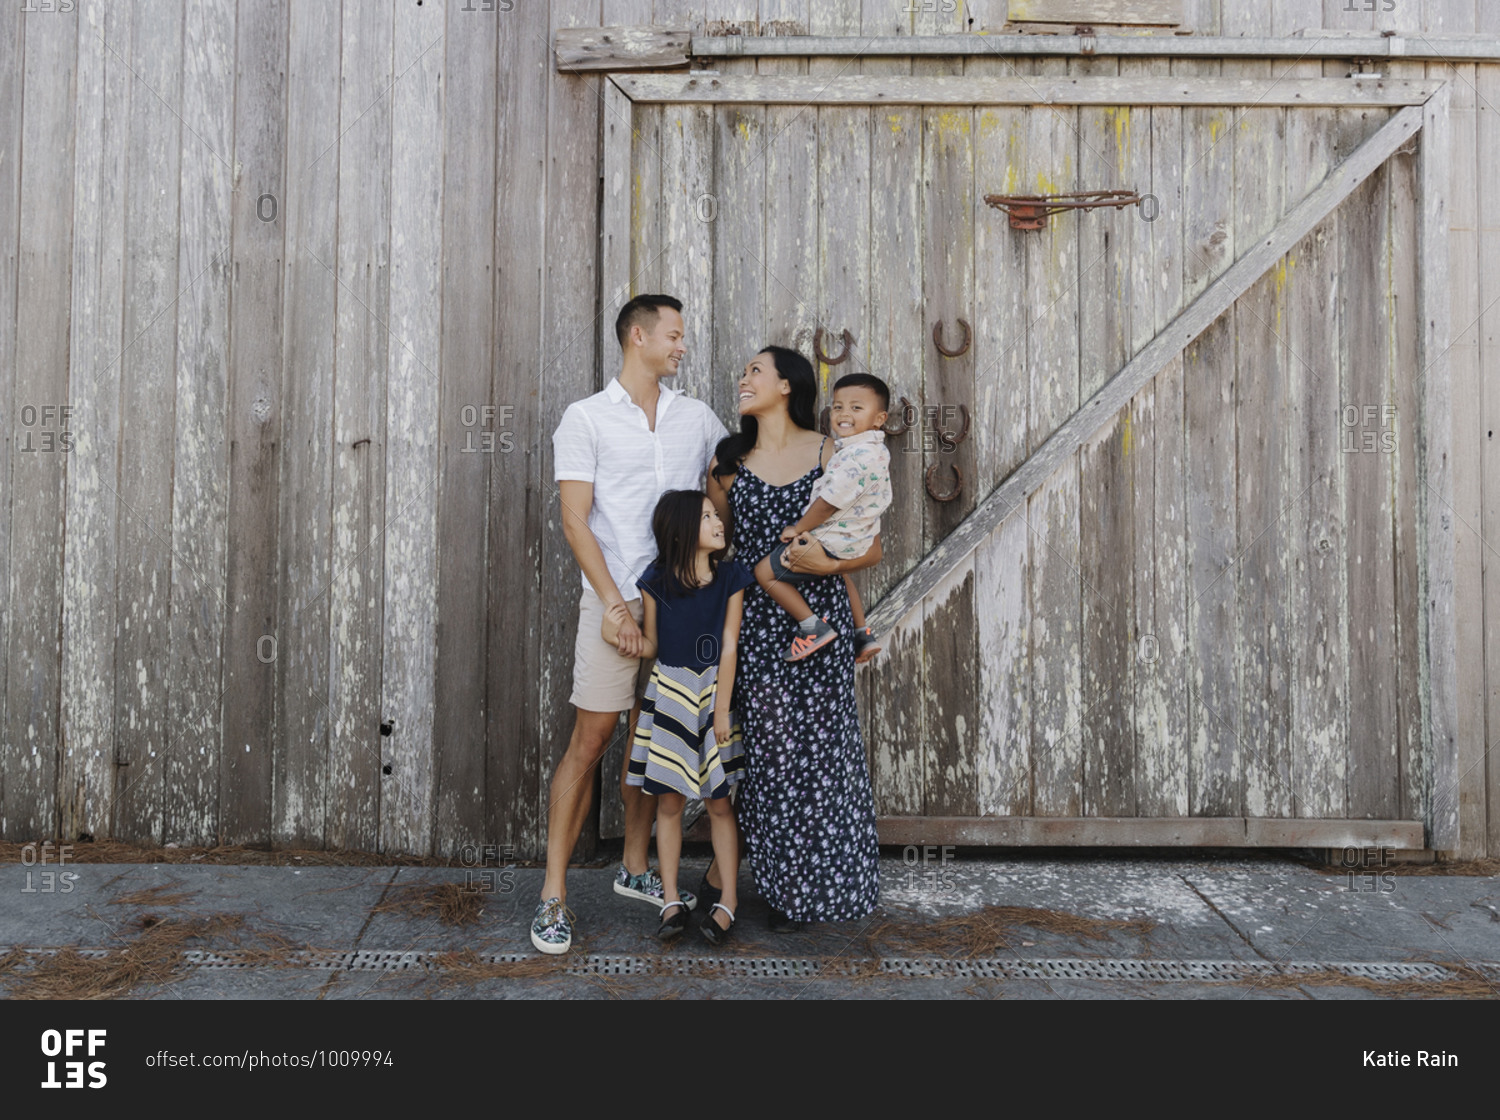 A happy young family standing together in front of an old wooden barn